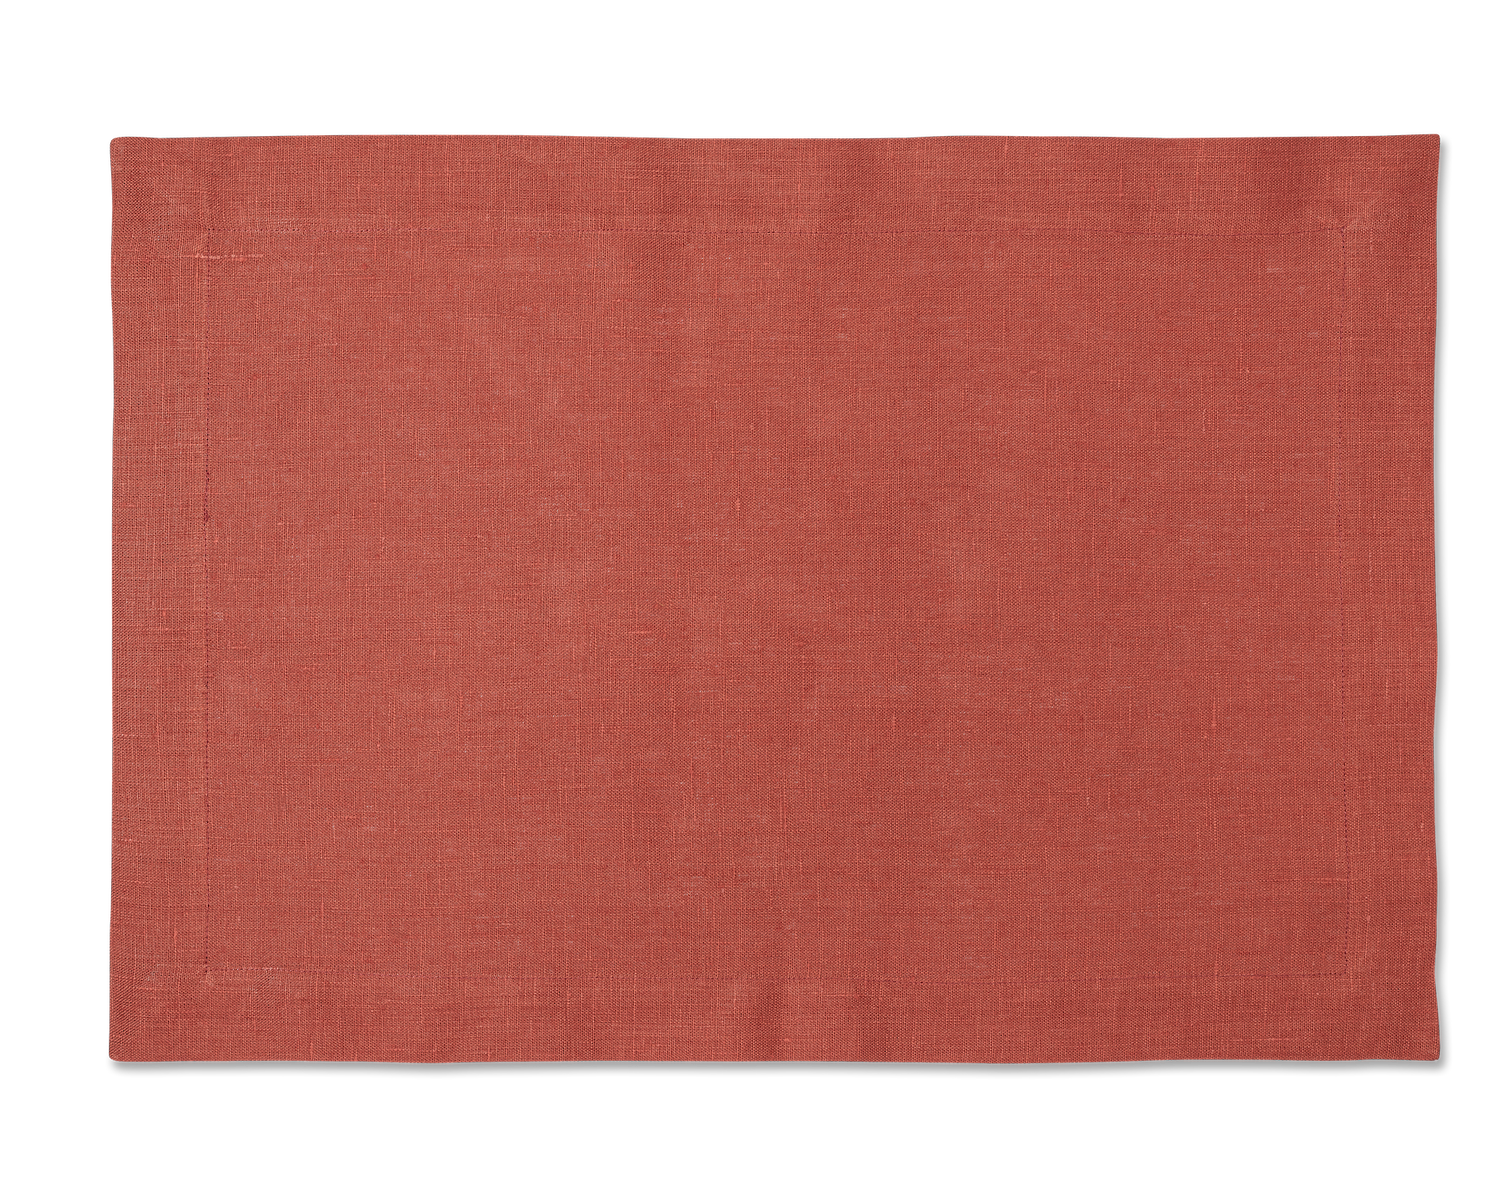 A linen placemat in the color brick